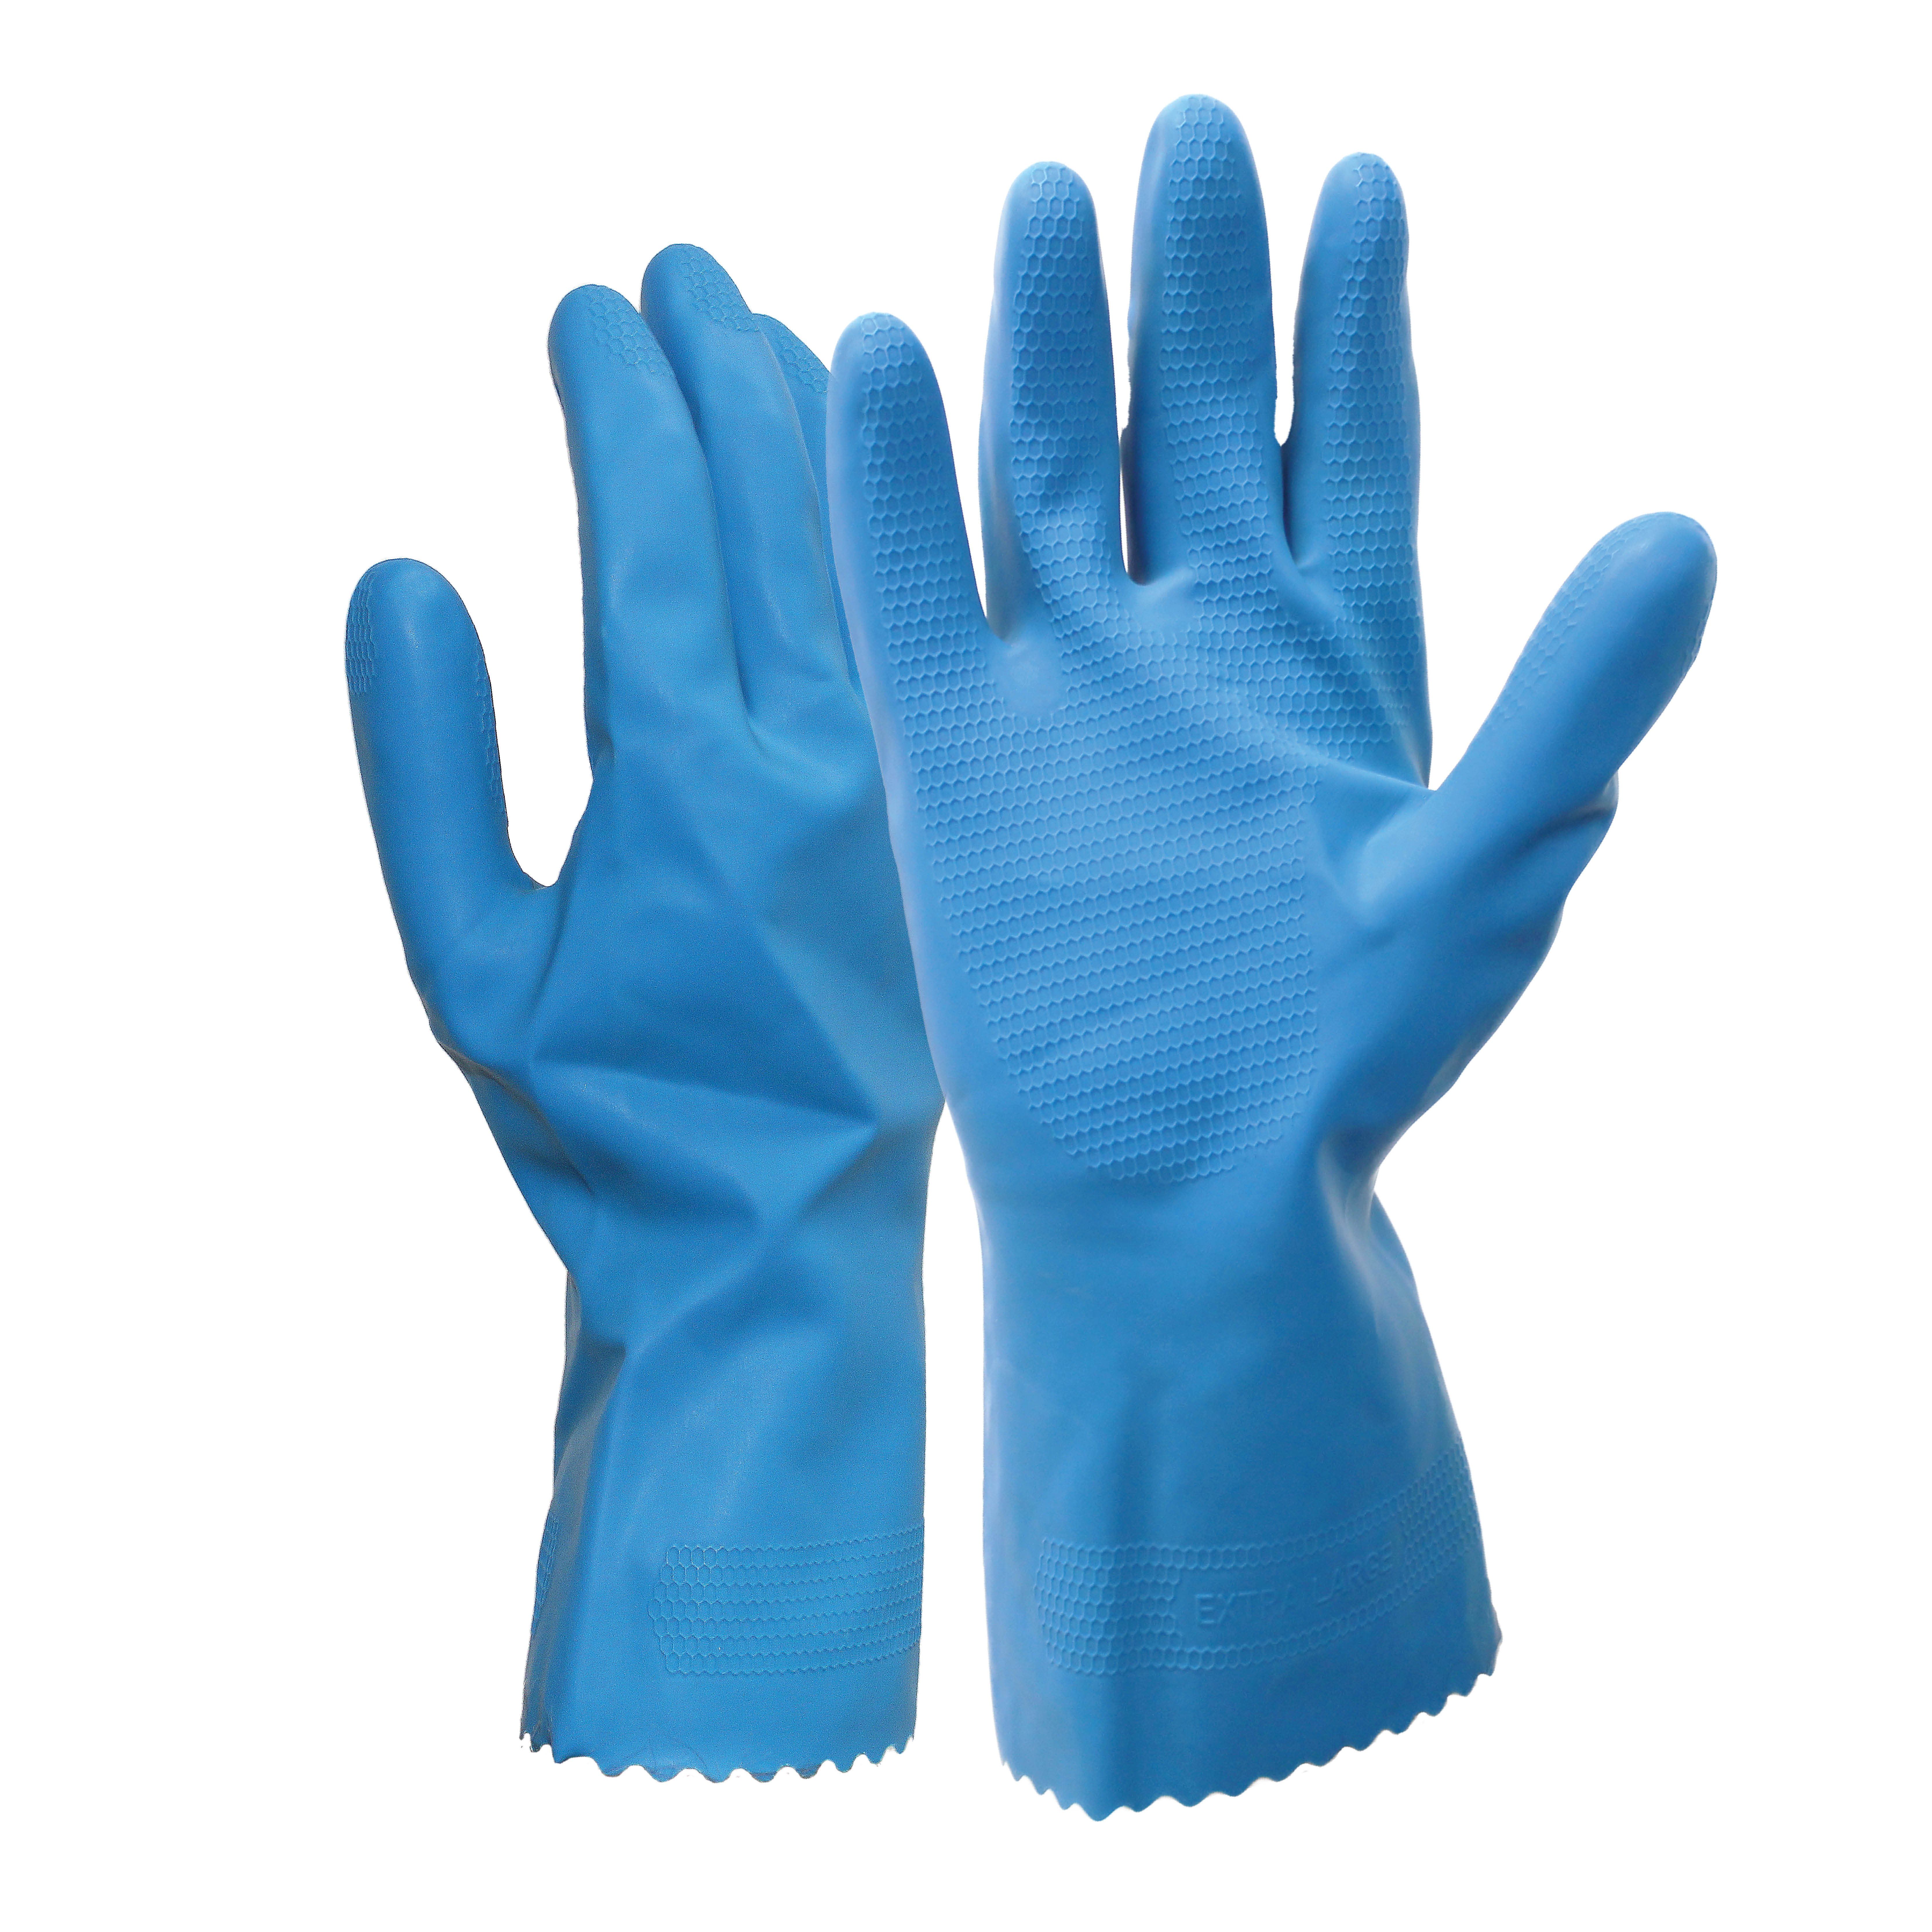 Protectaware Premium Silverlined Gloves Blue (pair)